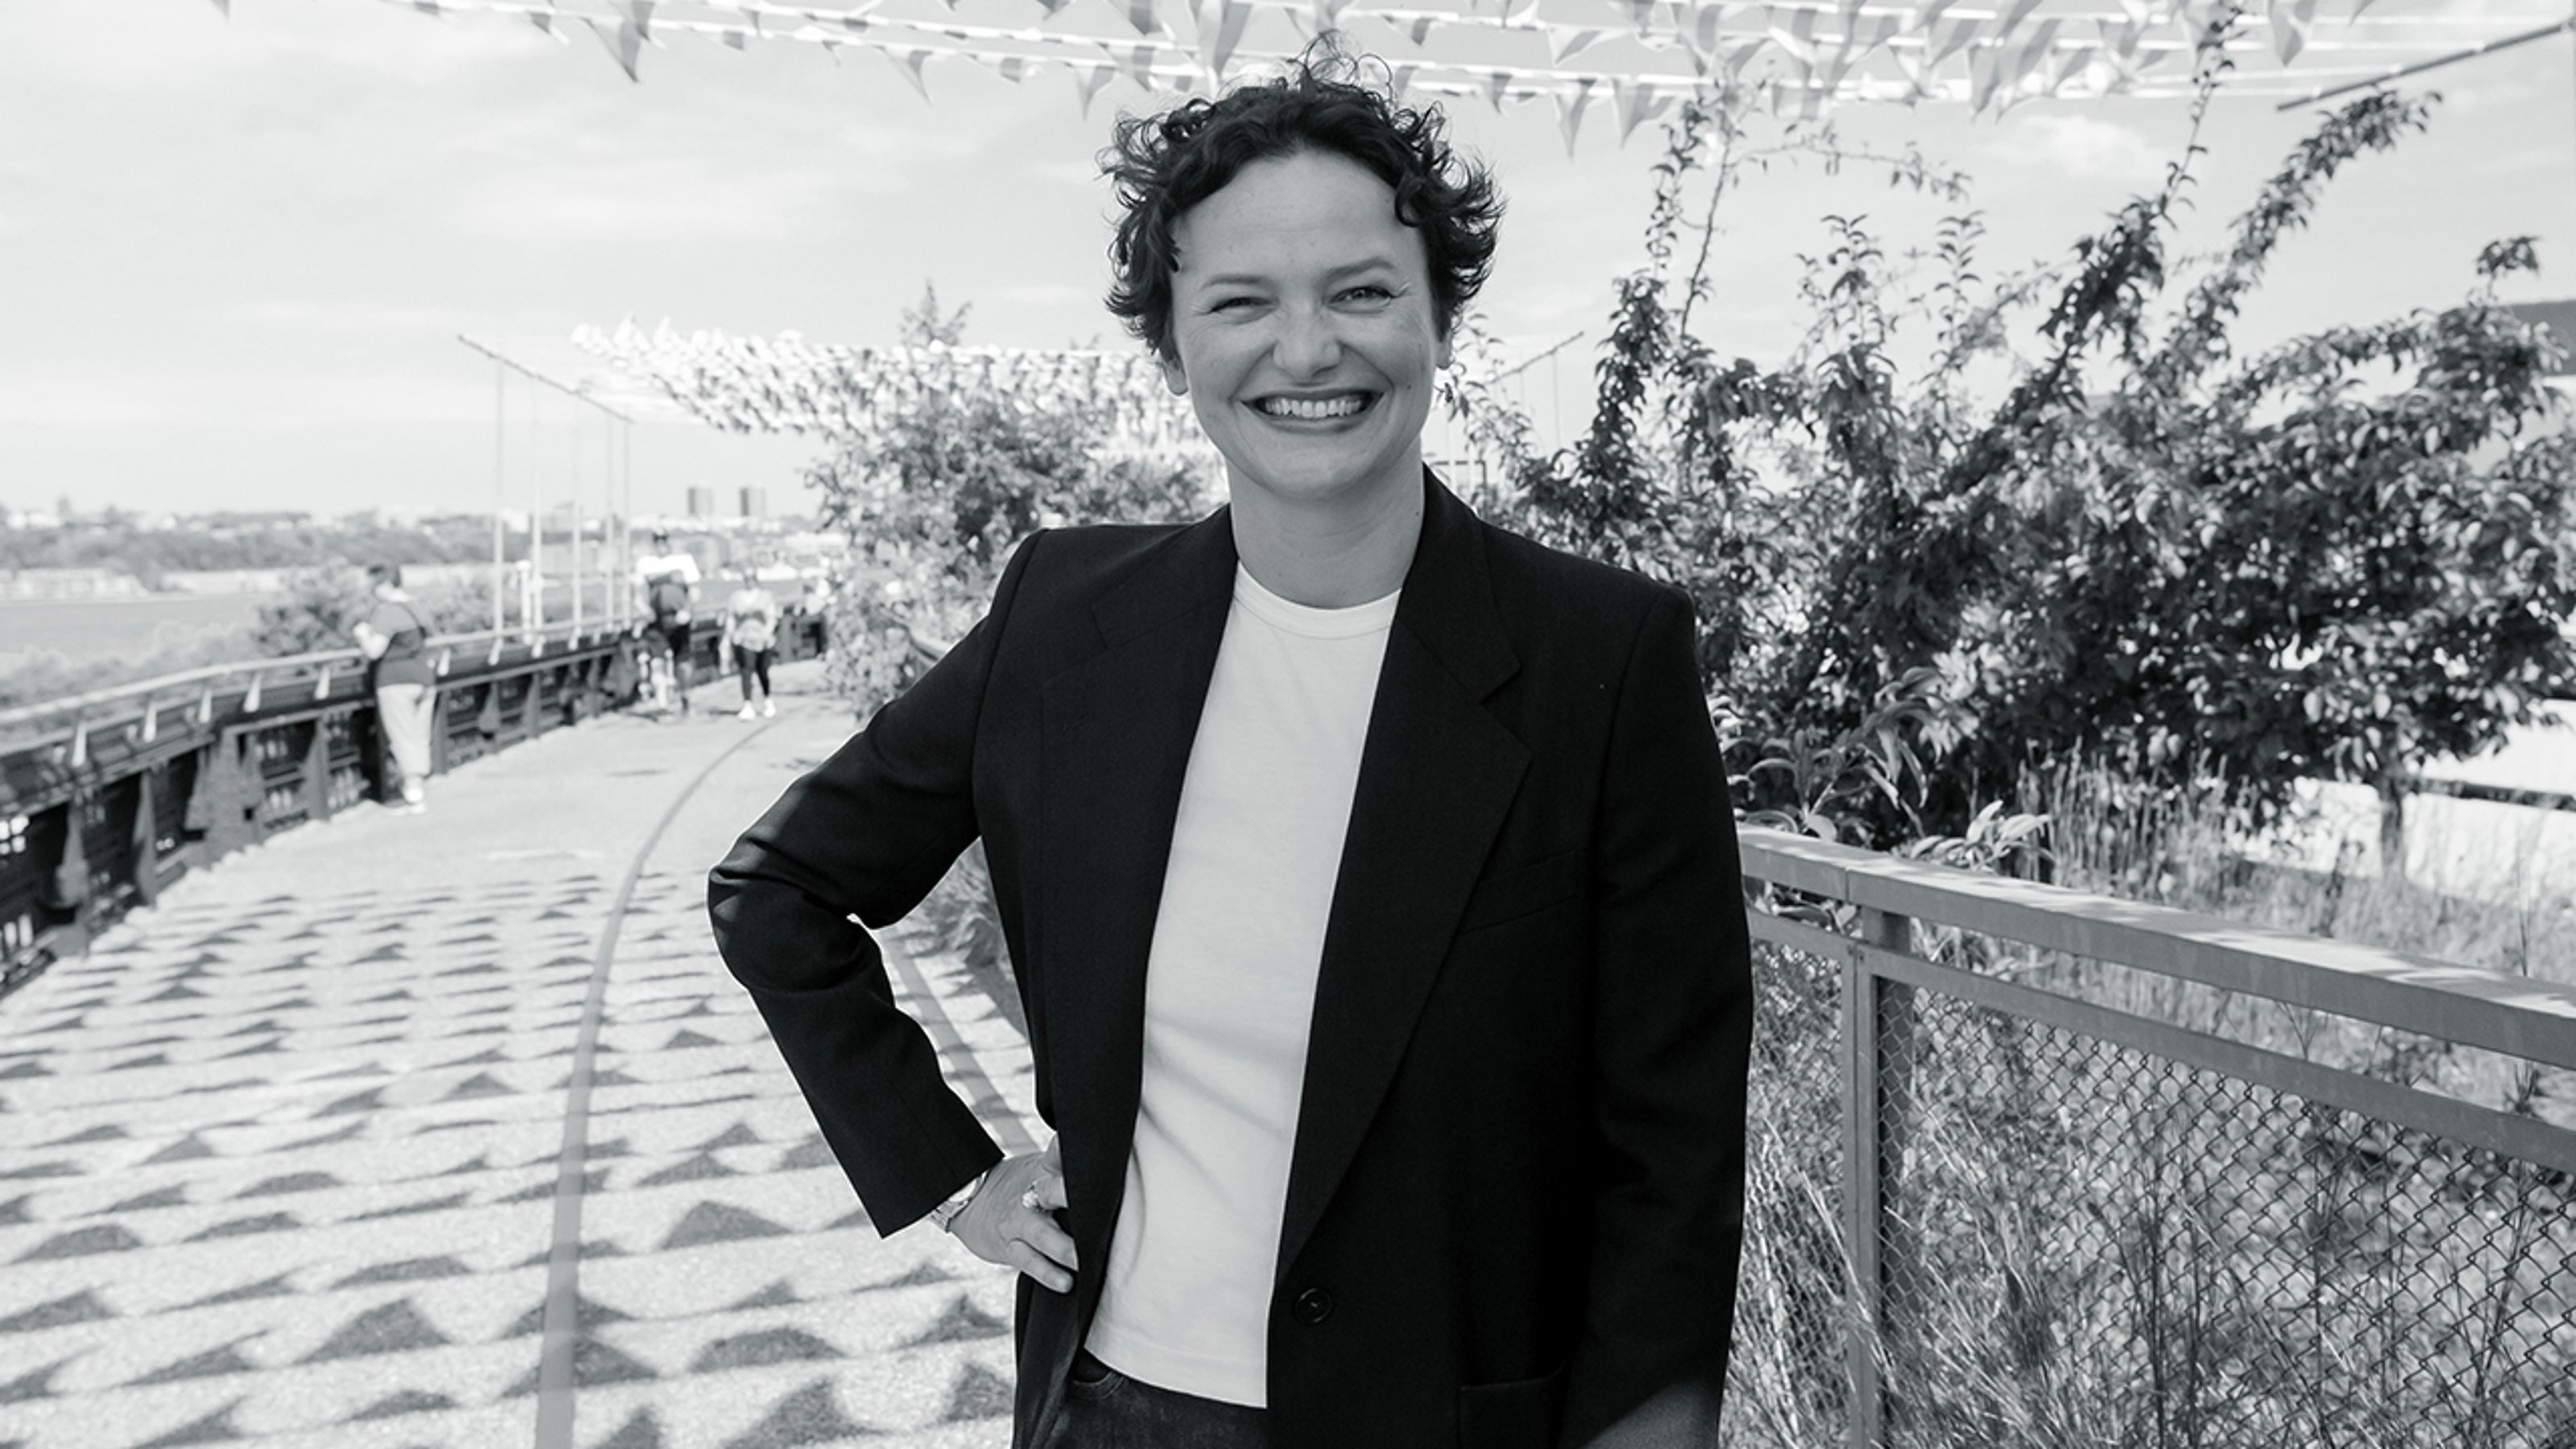 Black and white photograph of the Artistic Director of the 59th Venice Biennale Cecilia Alemani smiling at the camera